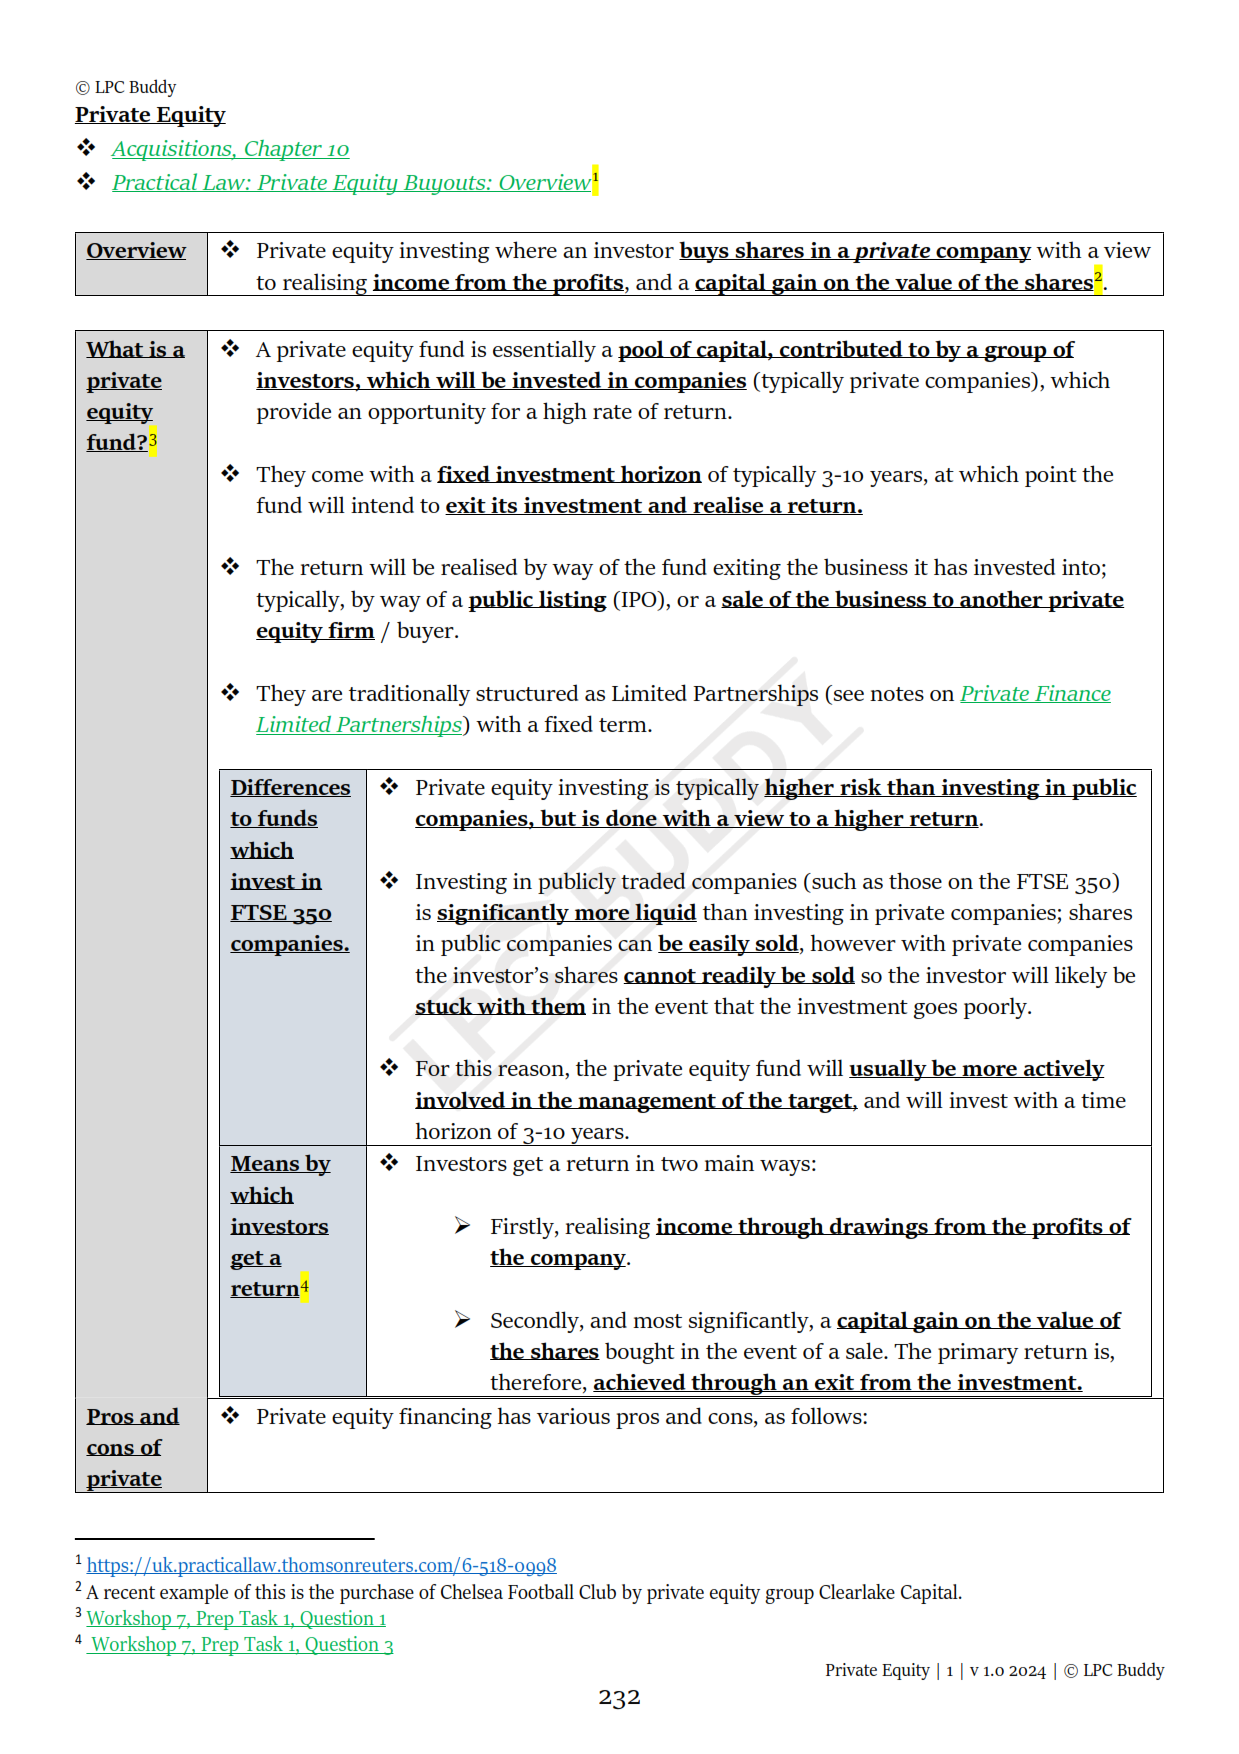 LPC Buddy™ 2024 | Mergers & Acquisitions | Distinction Level Study Guide for the LPC (Electronic)